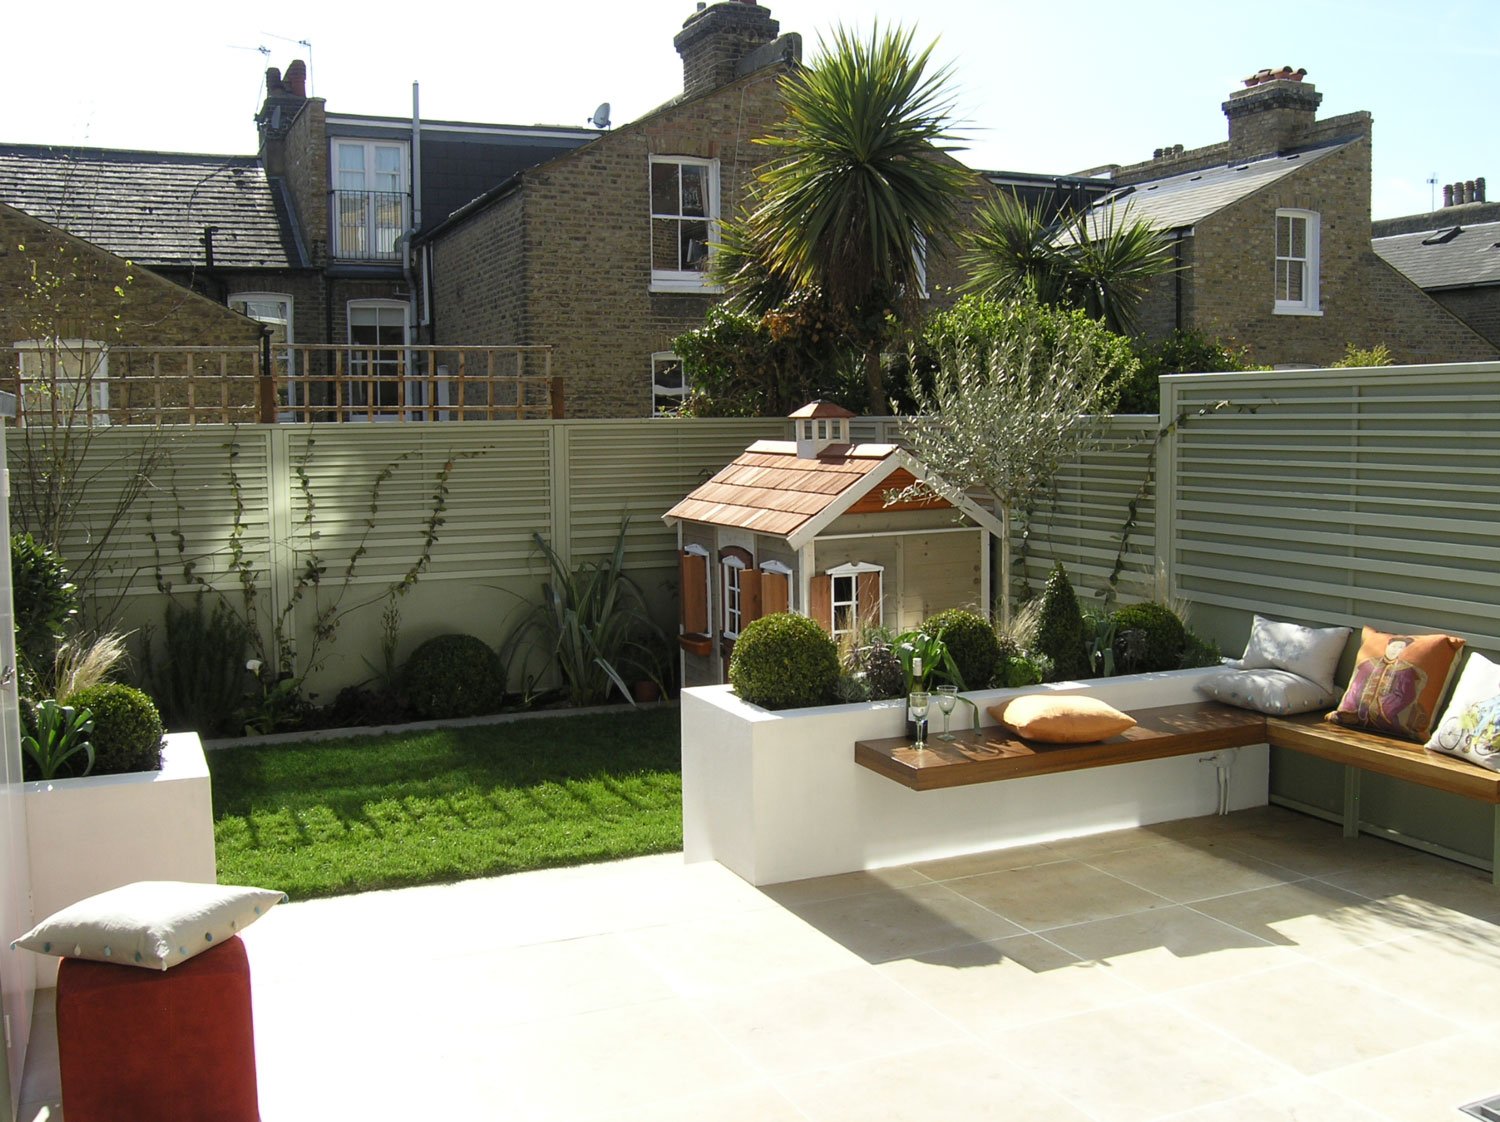  Square garden designs with patio seating and children's play house London. 